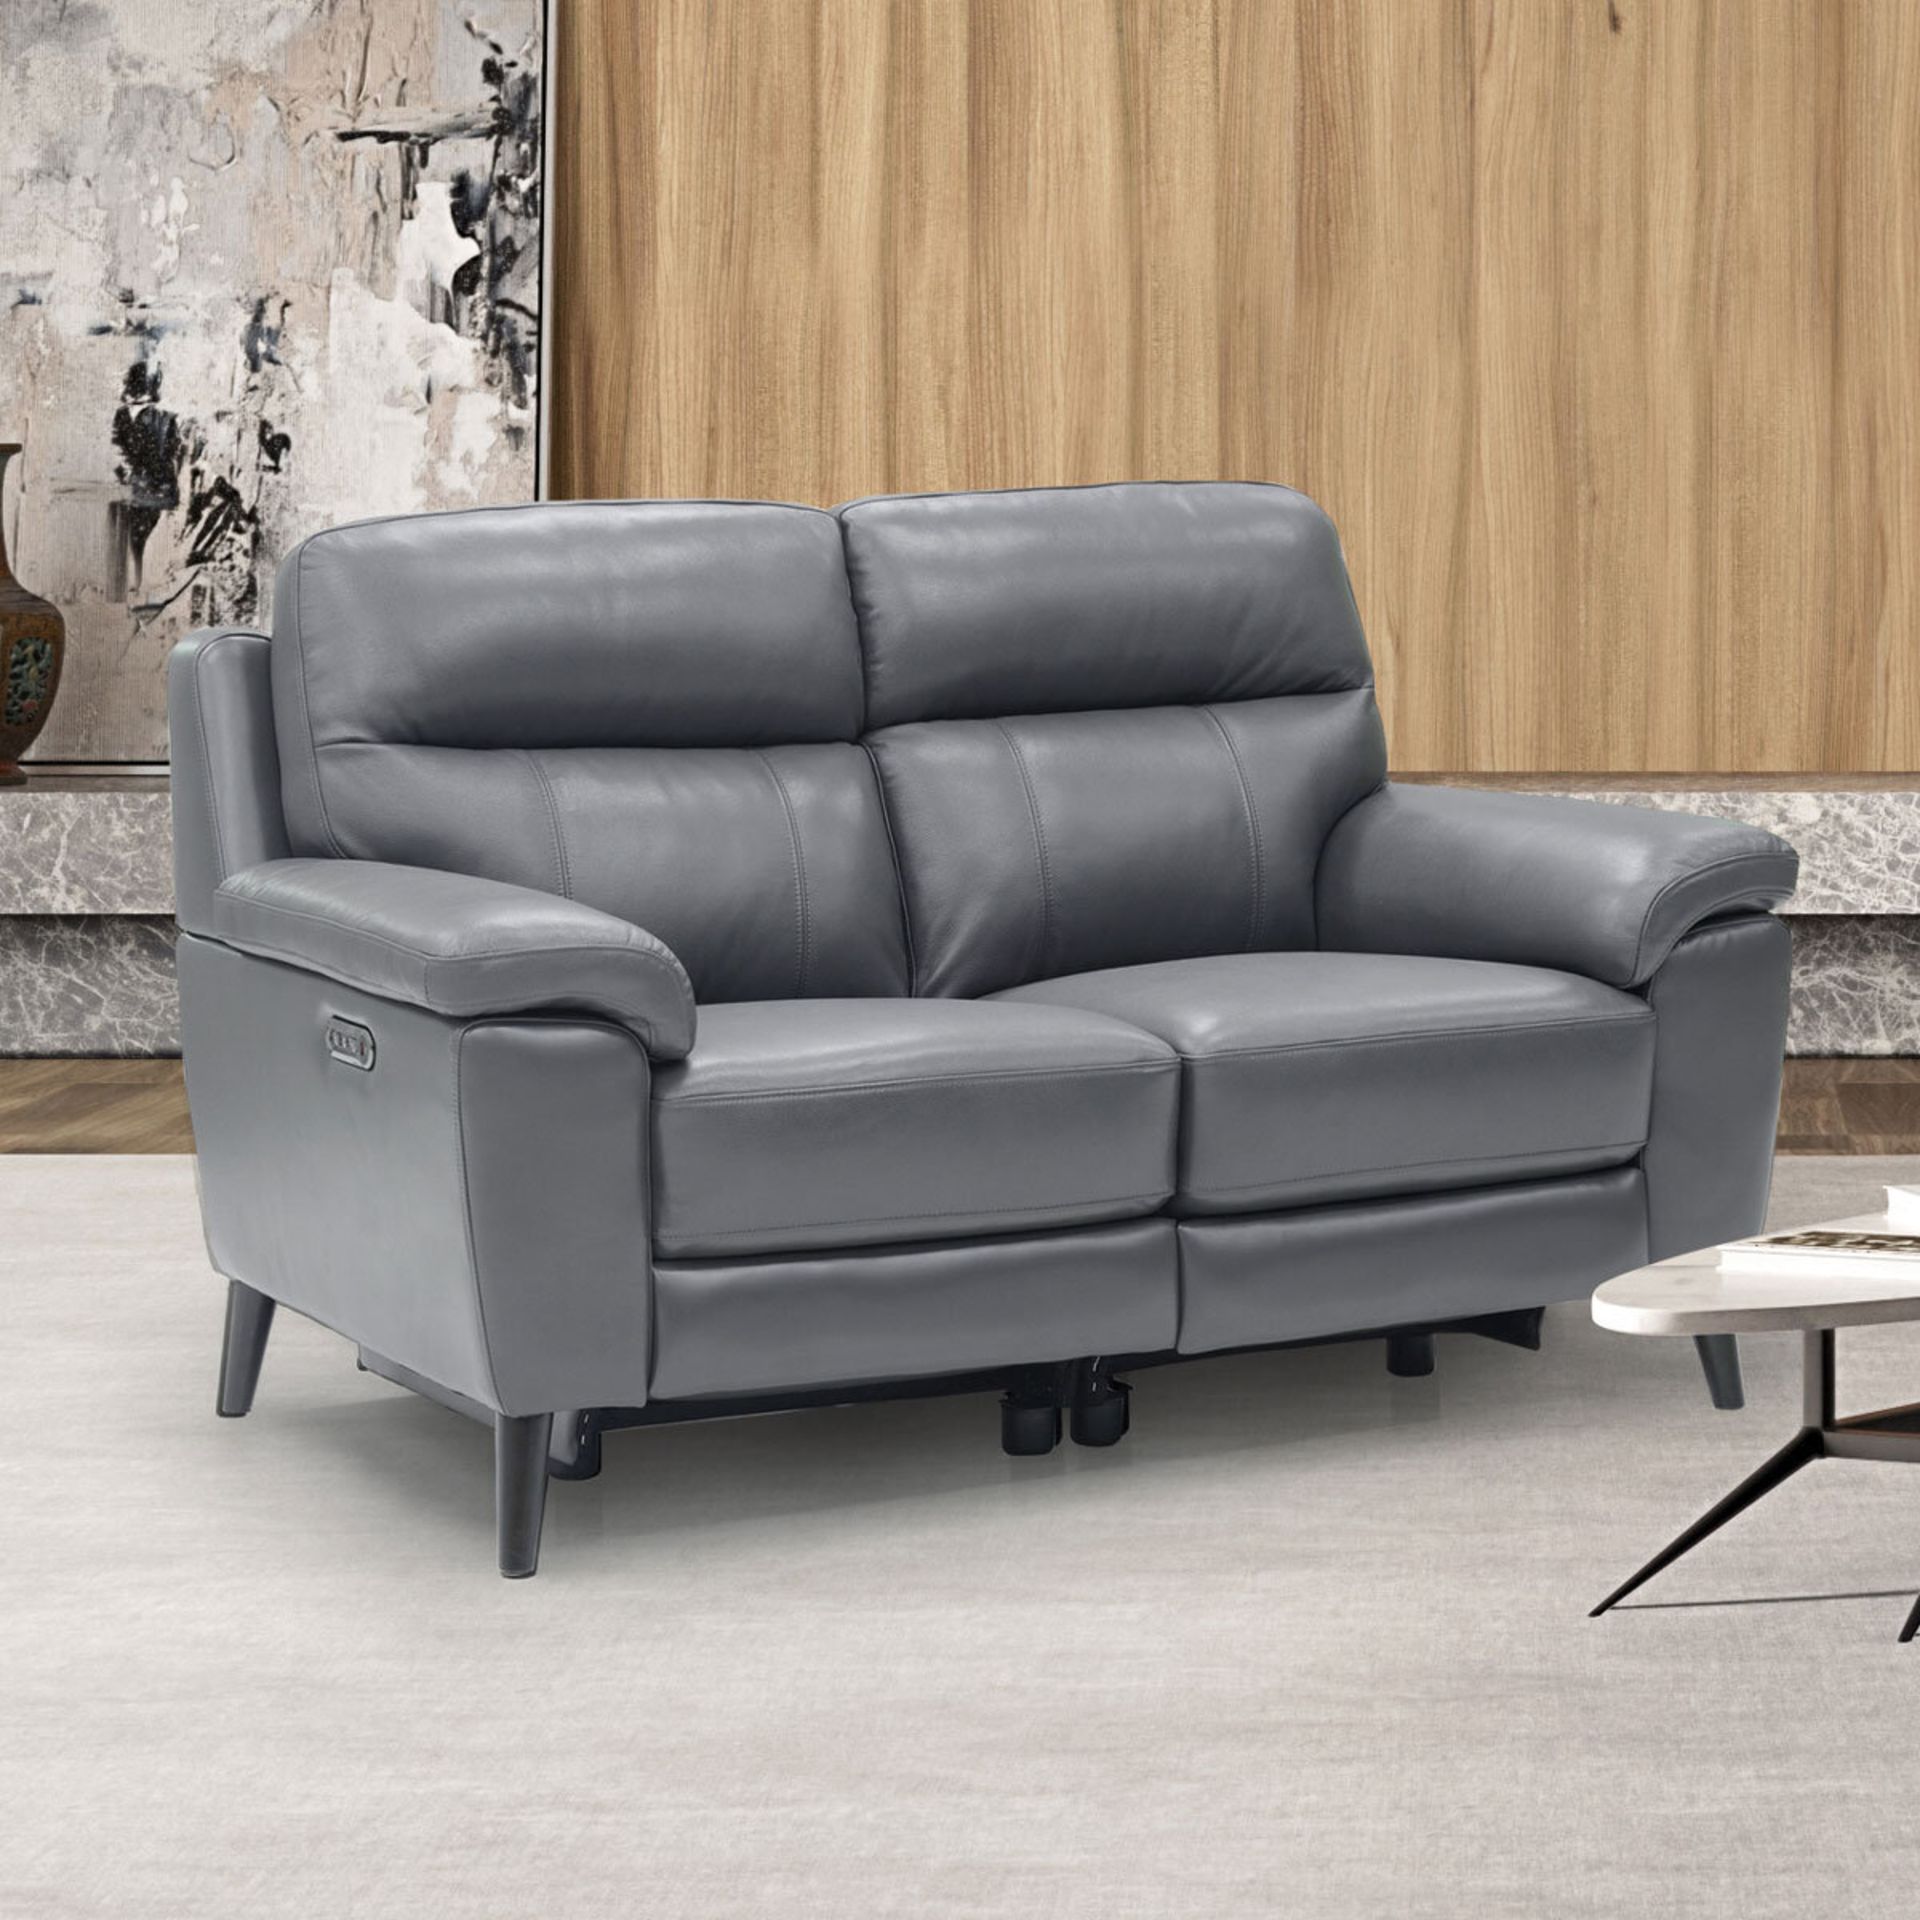 1 GRACE DARK GREY LEATHER POWER RECLINING 2 SEATER SOFA RRP Â£1299 (PICTURES FOR ILLUSTRATION